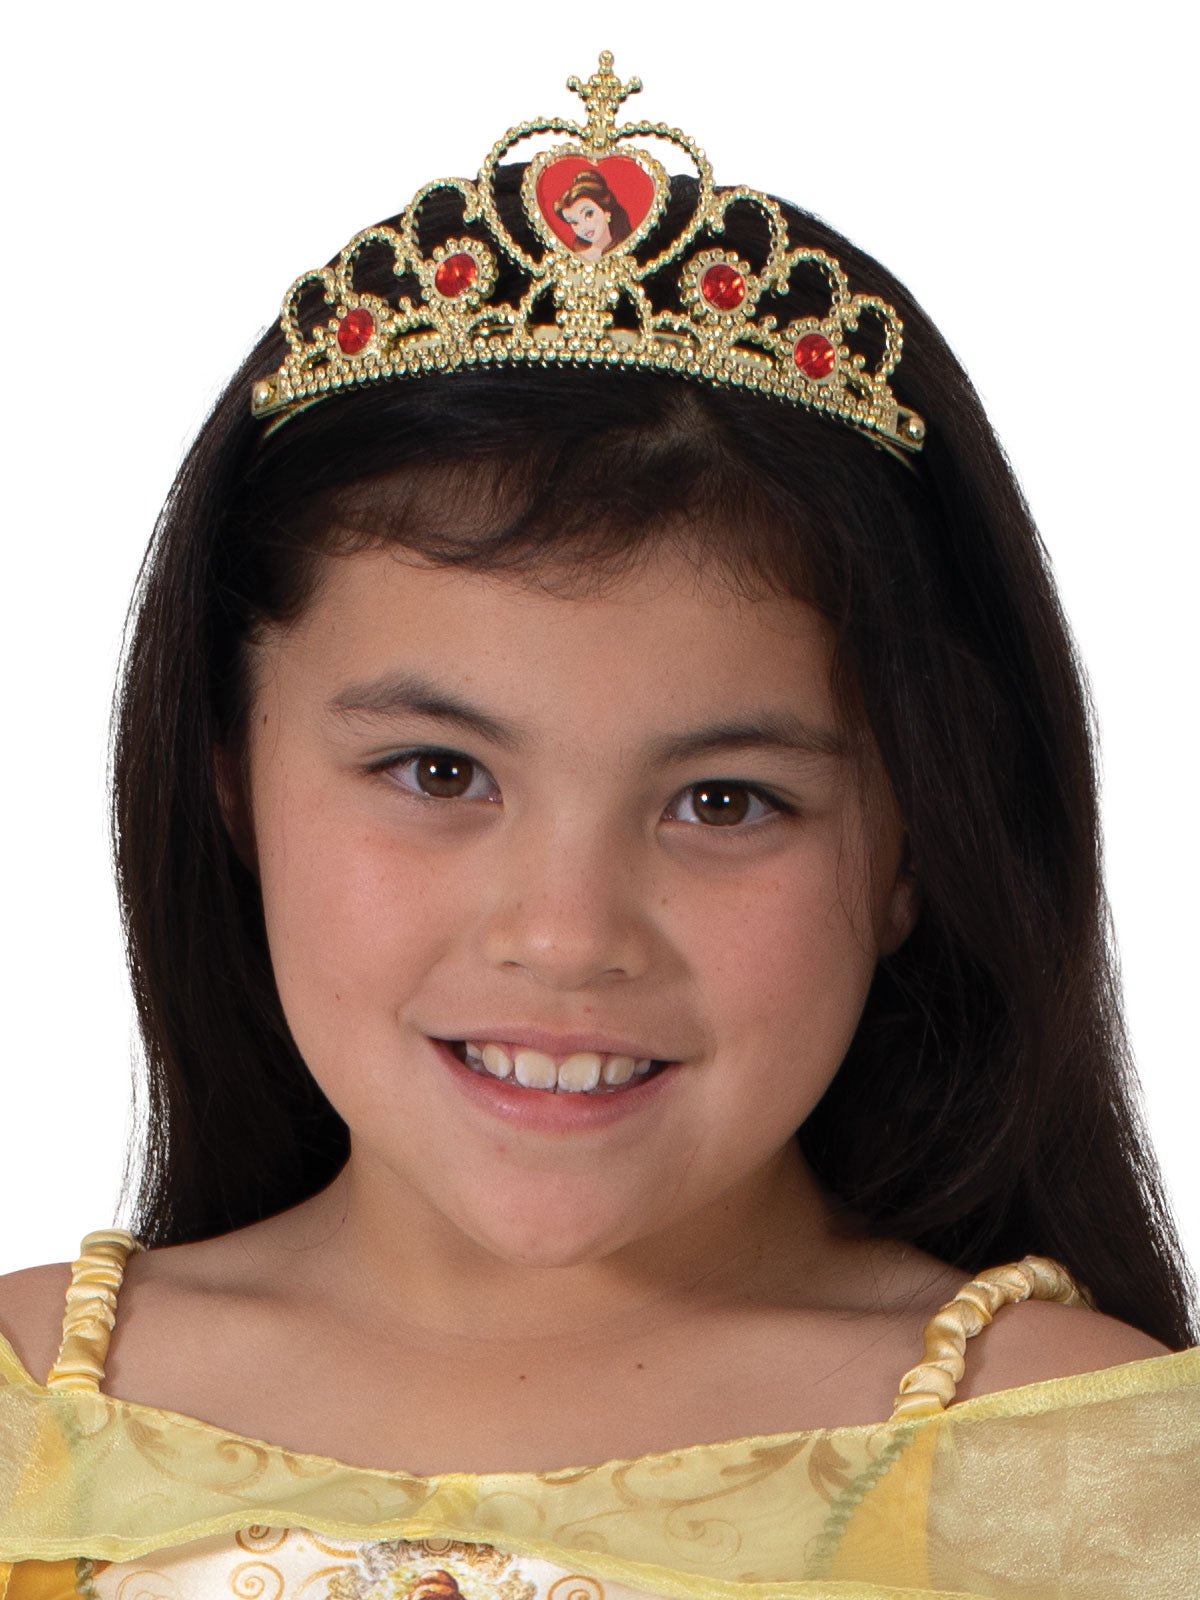 Girls' Belle Dress and Tiara Set - Official Disney Product